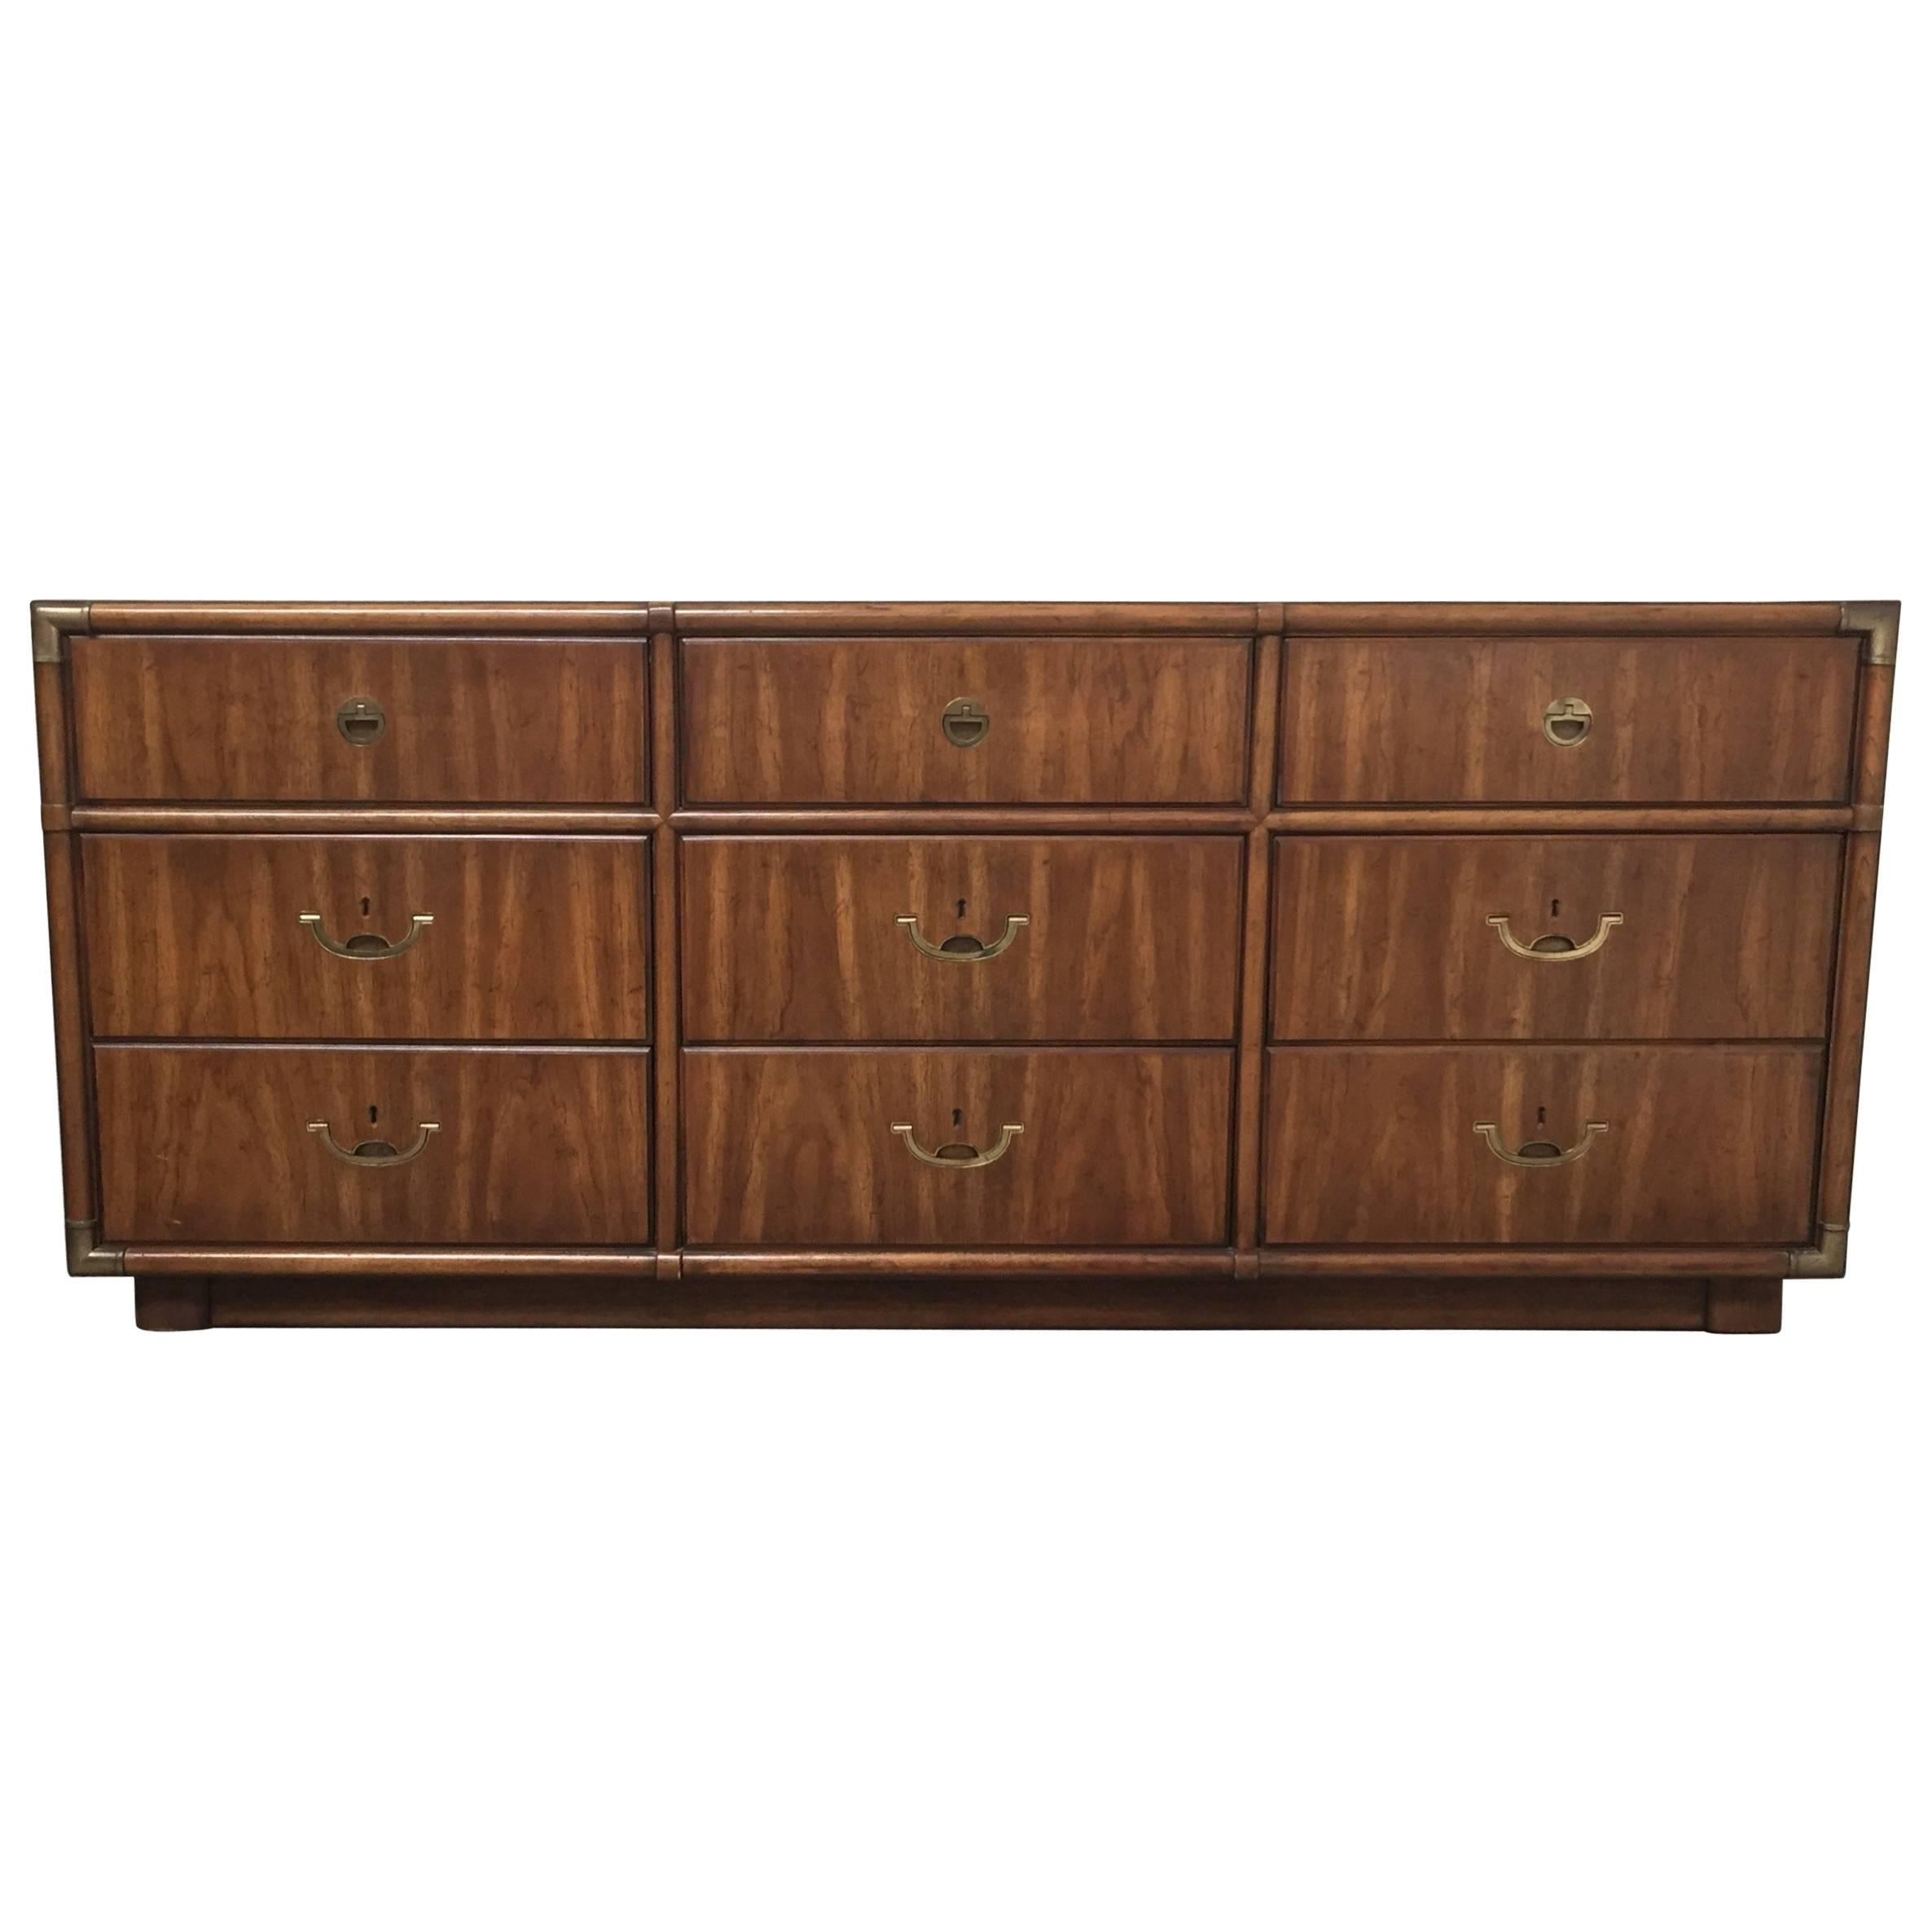 Campaign Style Nine-Drawer Dresser by Drexel